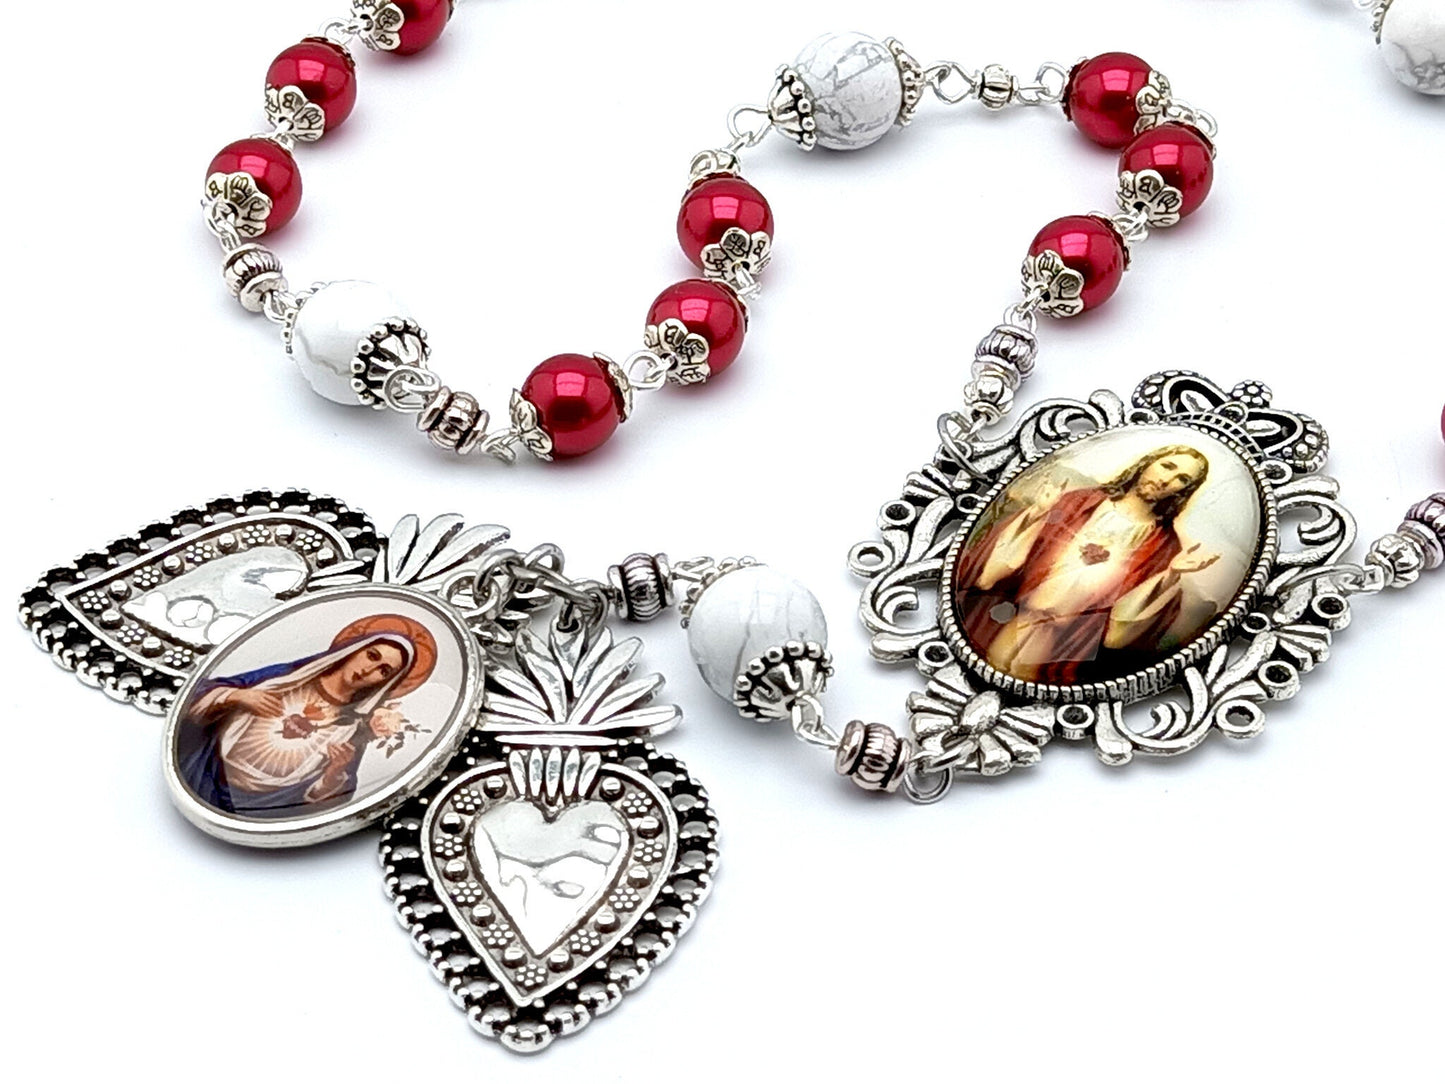 Two Hearts of Jesus and Mary unique rosary beads prayer chaplet with red and white beads, silver two heart medals and picture medals.